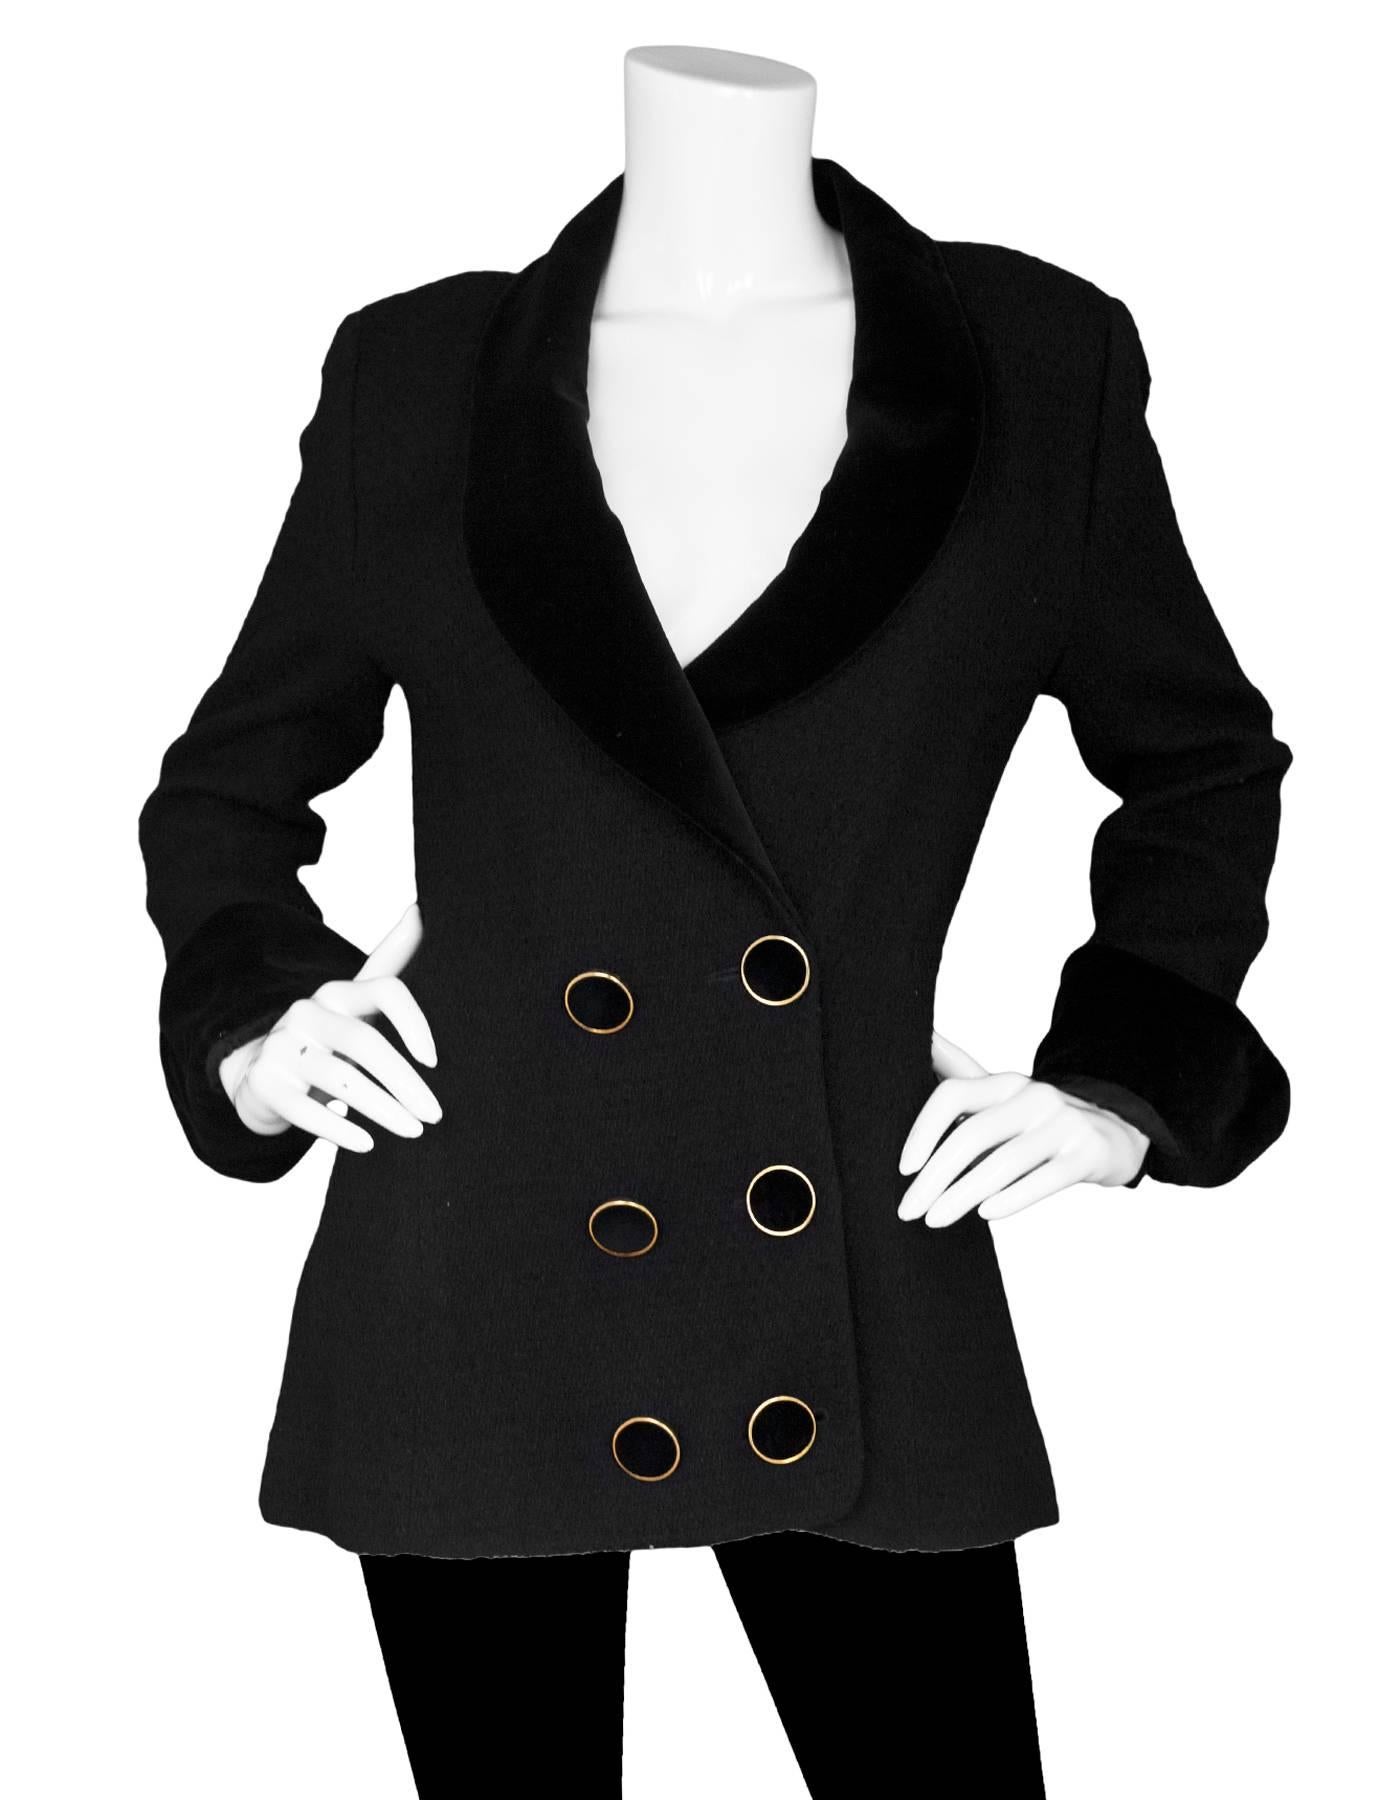 Karl Lagerfeld Vintage Black Boucle & Velvet Jacket

Made In: France
Color: Black
Composition: Not listed, feels like wool blend
Lining: Black textile
Closure/Opening: Front button closure
Exterior Pockets: None
Interior Pockets: None
Overall